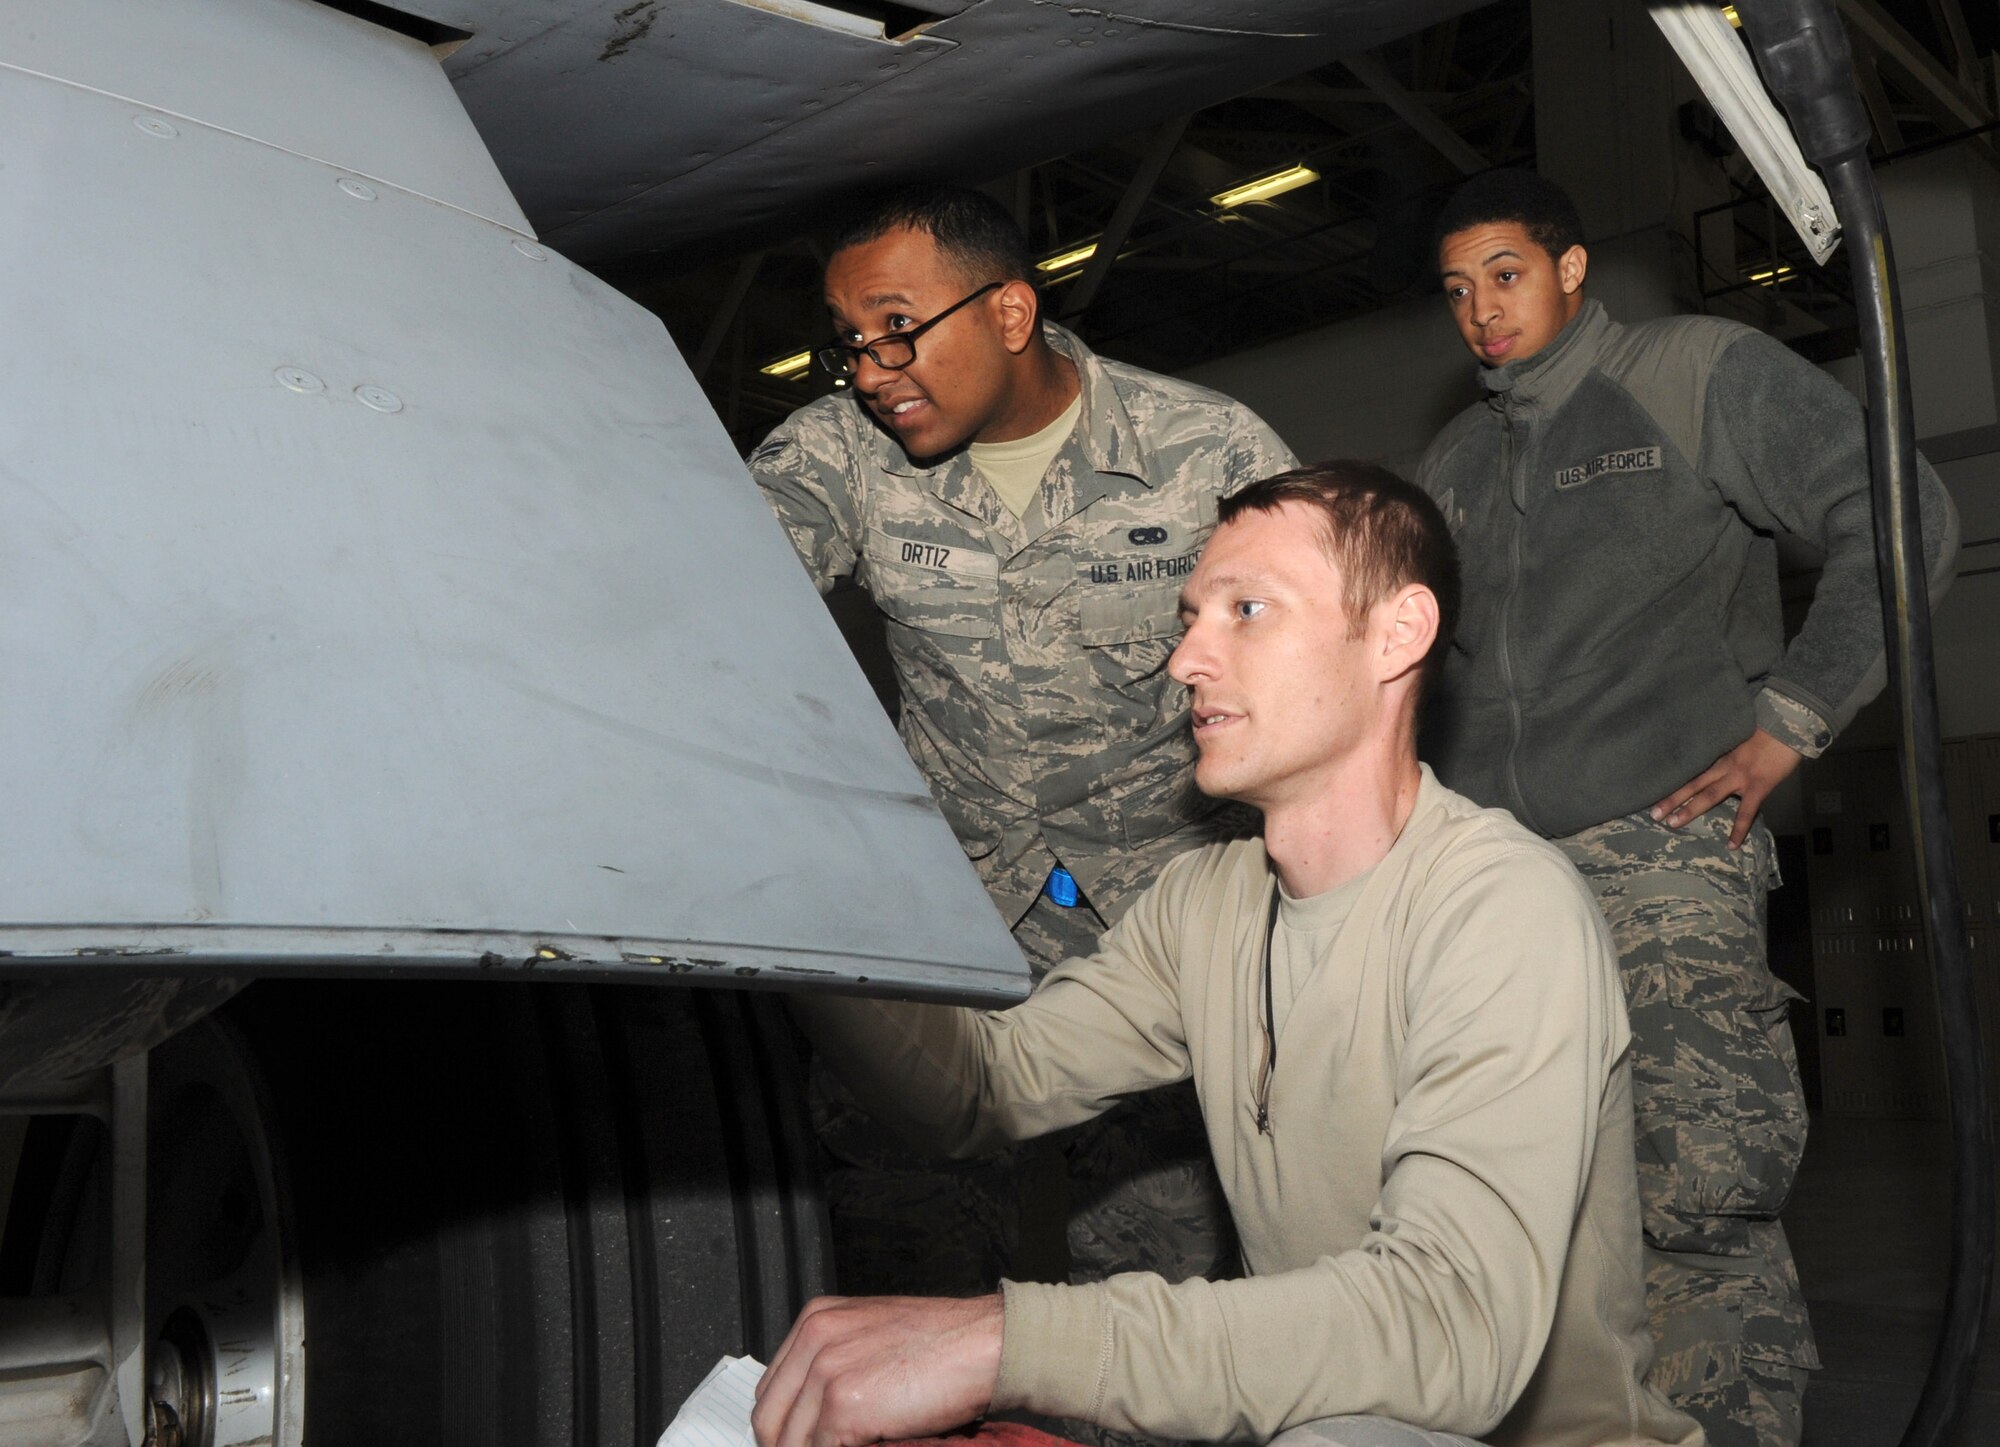 Airman 1st Class Jose Ortiz, left, Senior Airman Bryant Standridge, center, and Airman 1st Class Brandon Roby, 22nd Aircraft Maintenance Squadron crew chiefs, perform a high-winds inspection on a KC-135 Stratotanker, April 3, 2015 at McConnell Air Force Base, Kan. During high-winds inspections, crew chiefs look for any dents or cracks caused by high wind speeds that may compromise the integrity of the aircraft. (U.S. Air Force photo by Airman 1st Class Tara Fadenrecht)